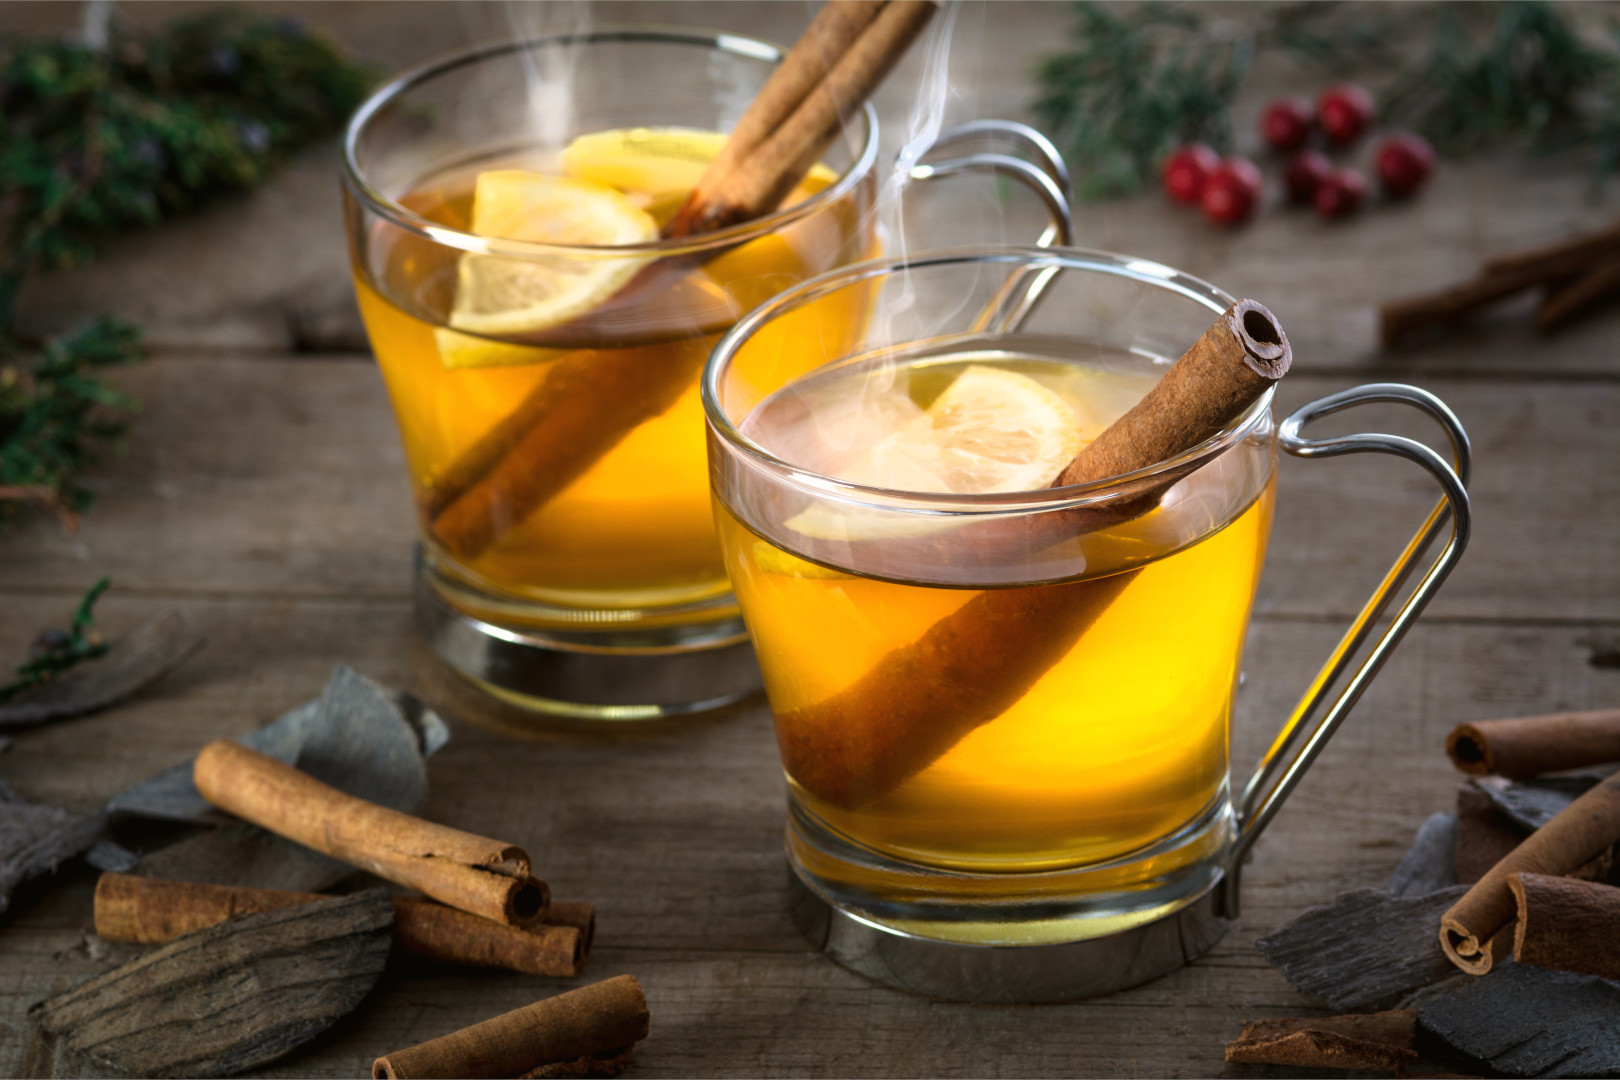 Two steaming hot toddies withe cinnamon sticks and lemon slices